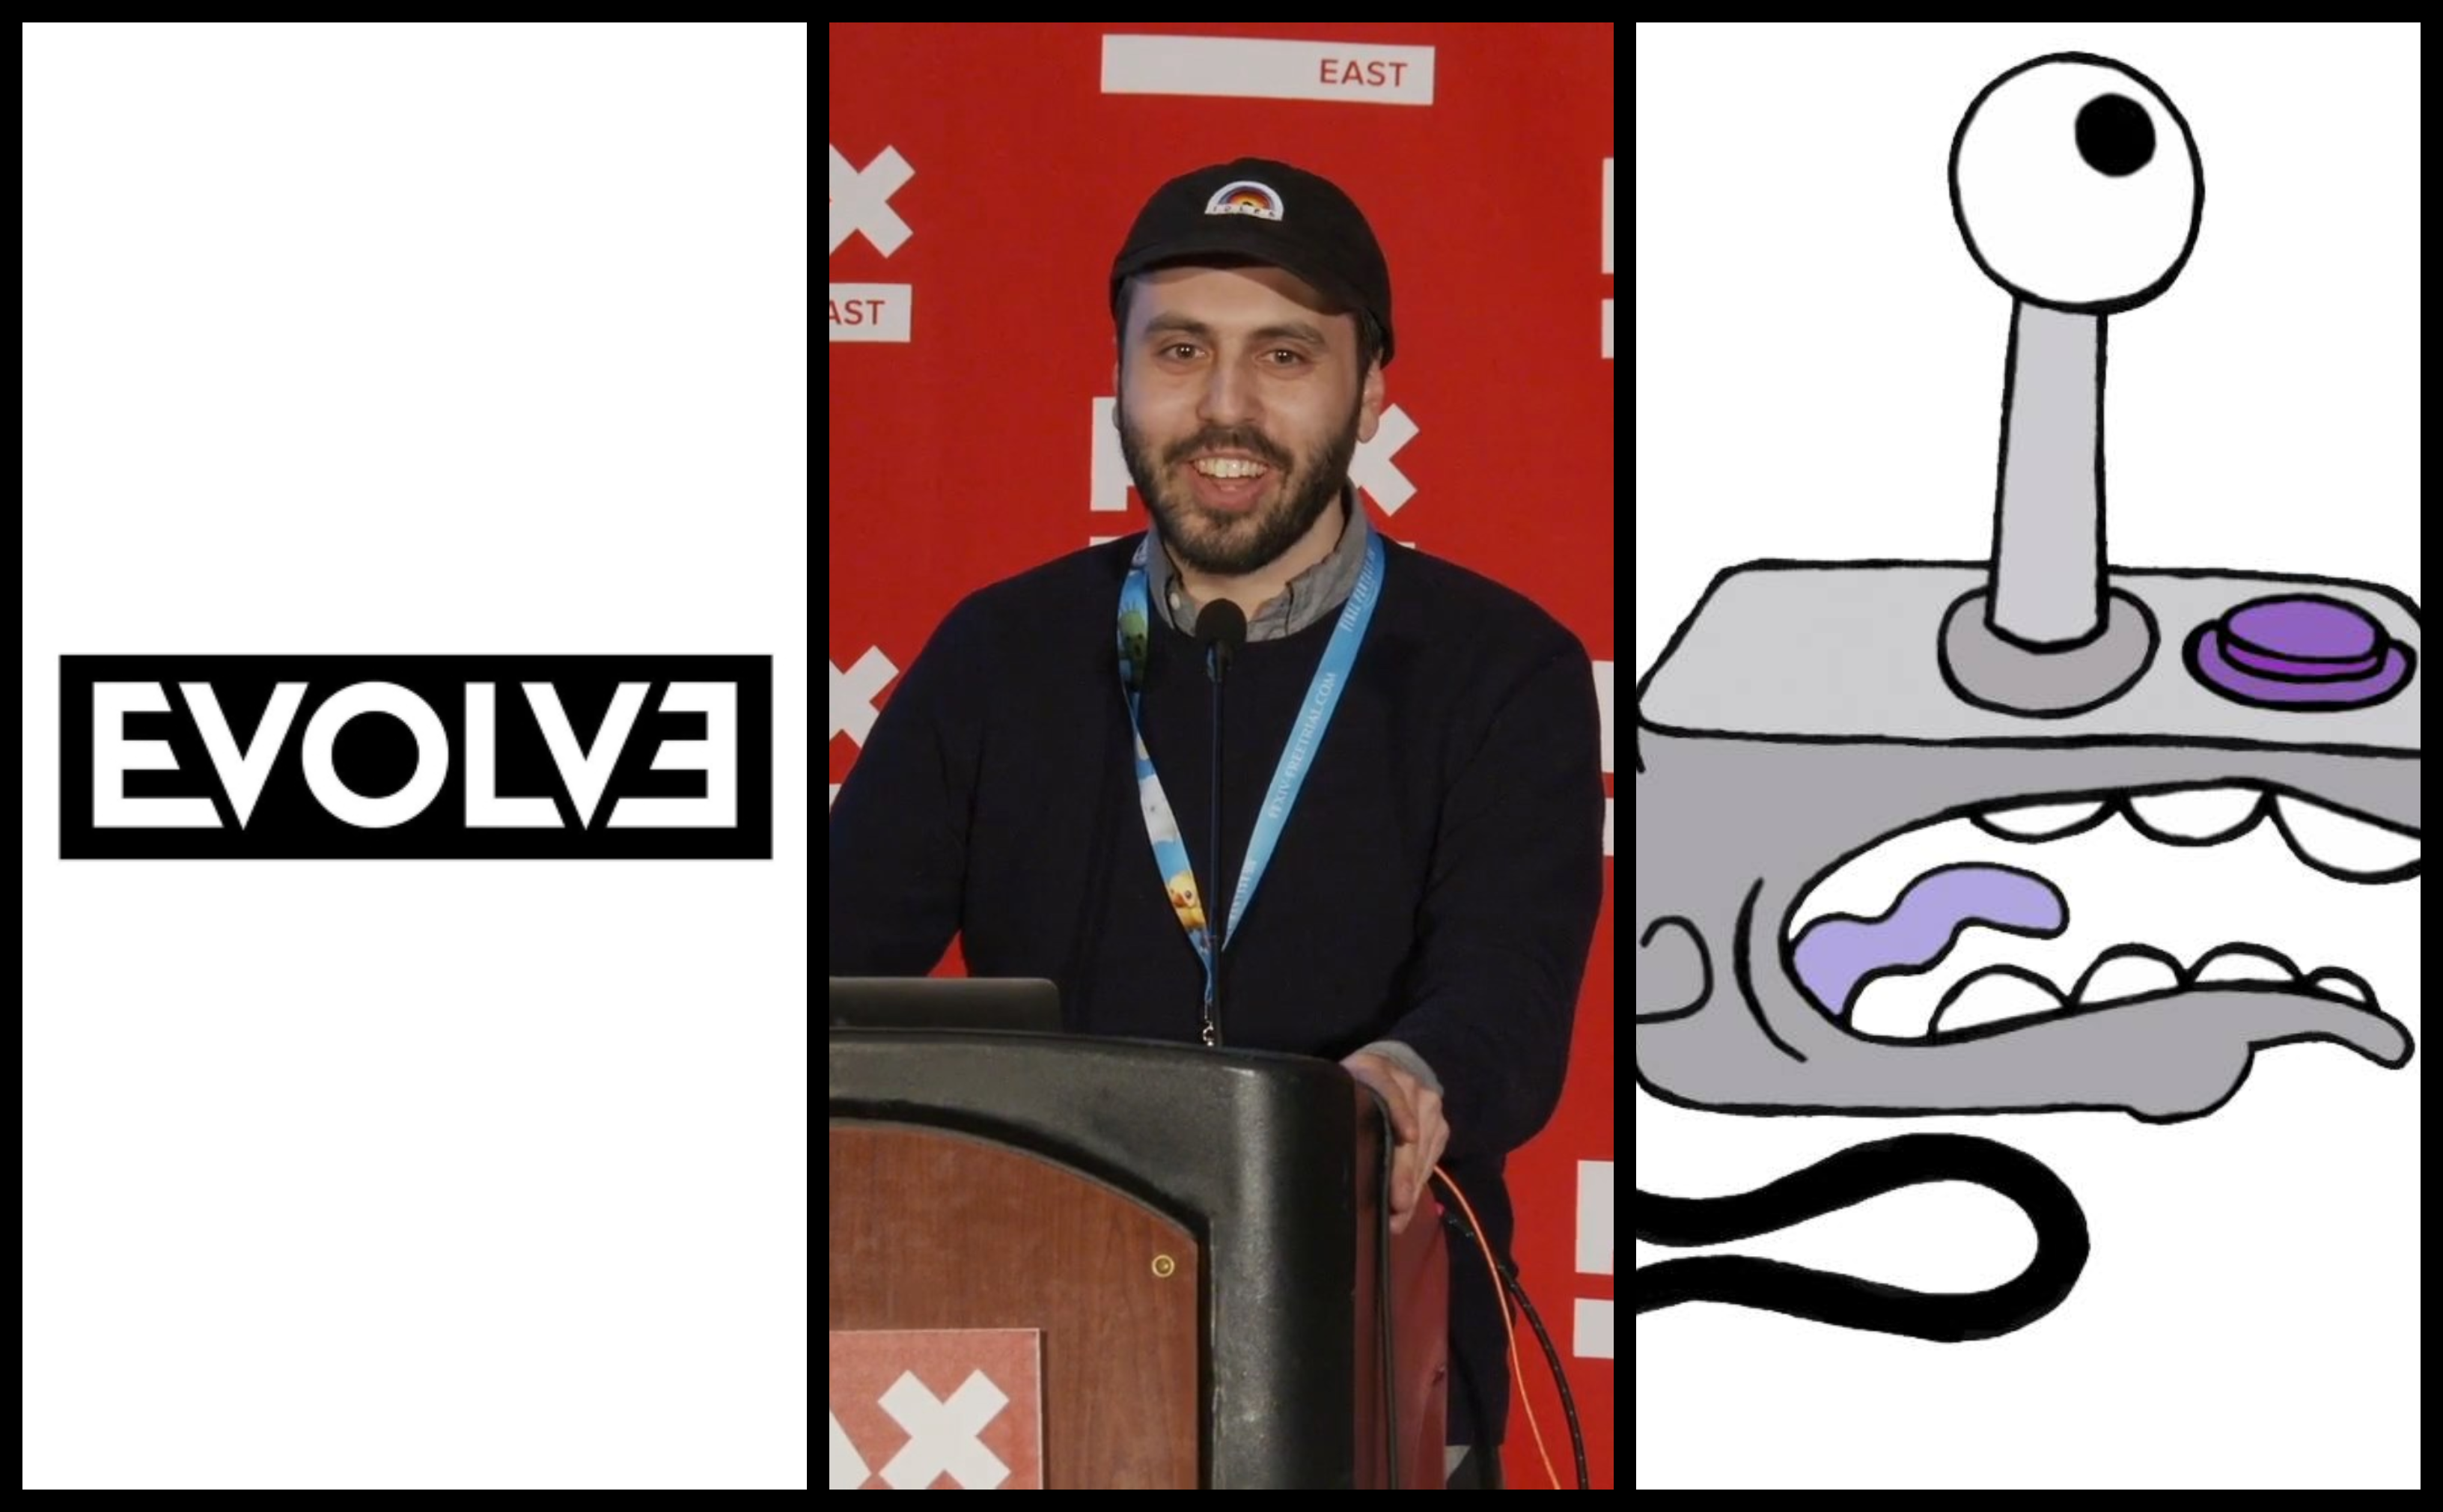 Comedy, Gaming, PR, and the Fall of Corporate Shitposting: An Evolve Q&A with Jeremy Kaplowitz, Editor-in-Chief of Hard Drive